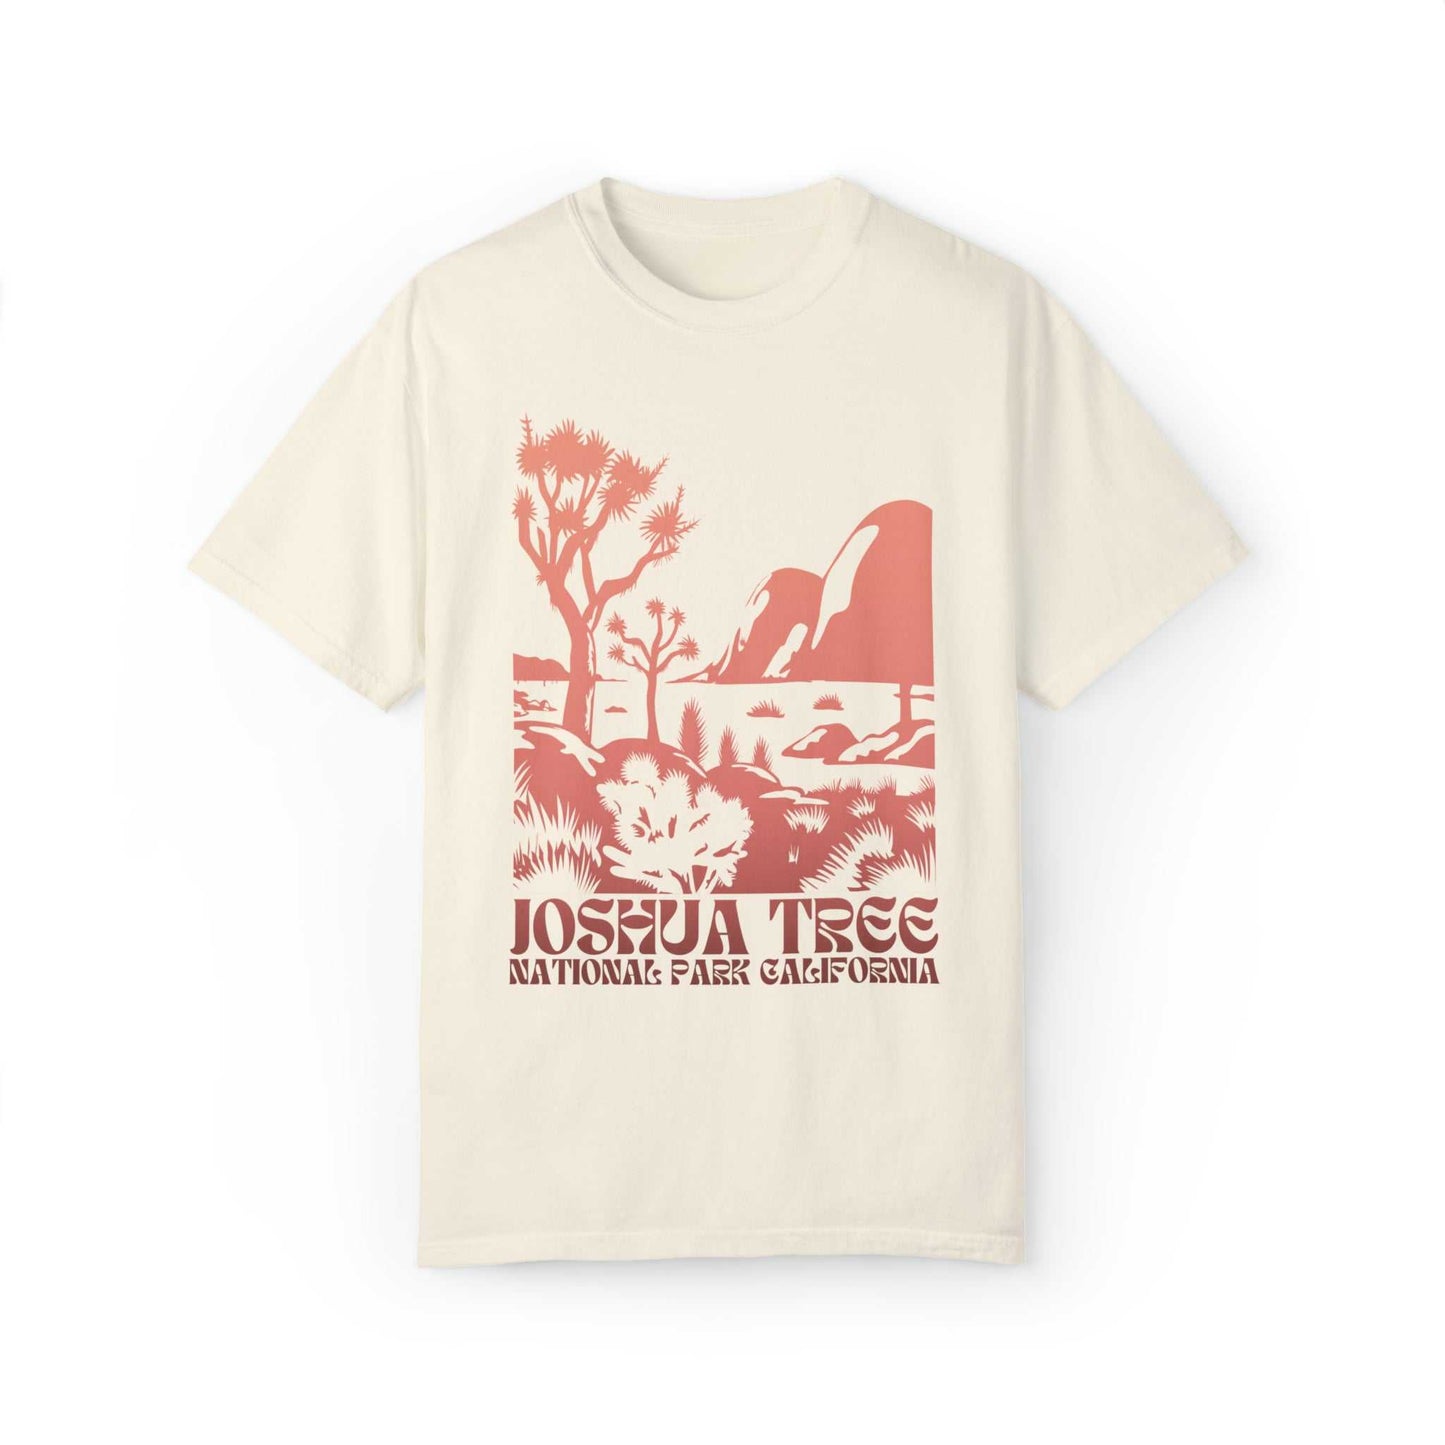 Joshua Tree National Park ShirtBring back the vibe on your next outdoor outing with this 90s vintage styled Joshua Tree National Park Graphic Tee.
- mid-weight cotton fabric - garment dyed for a v